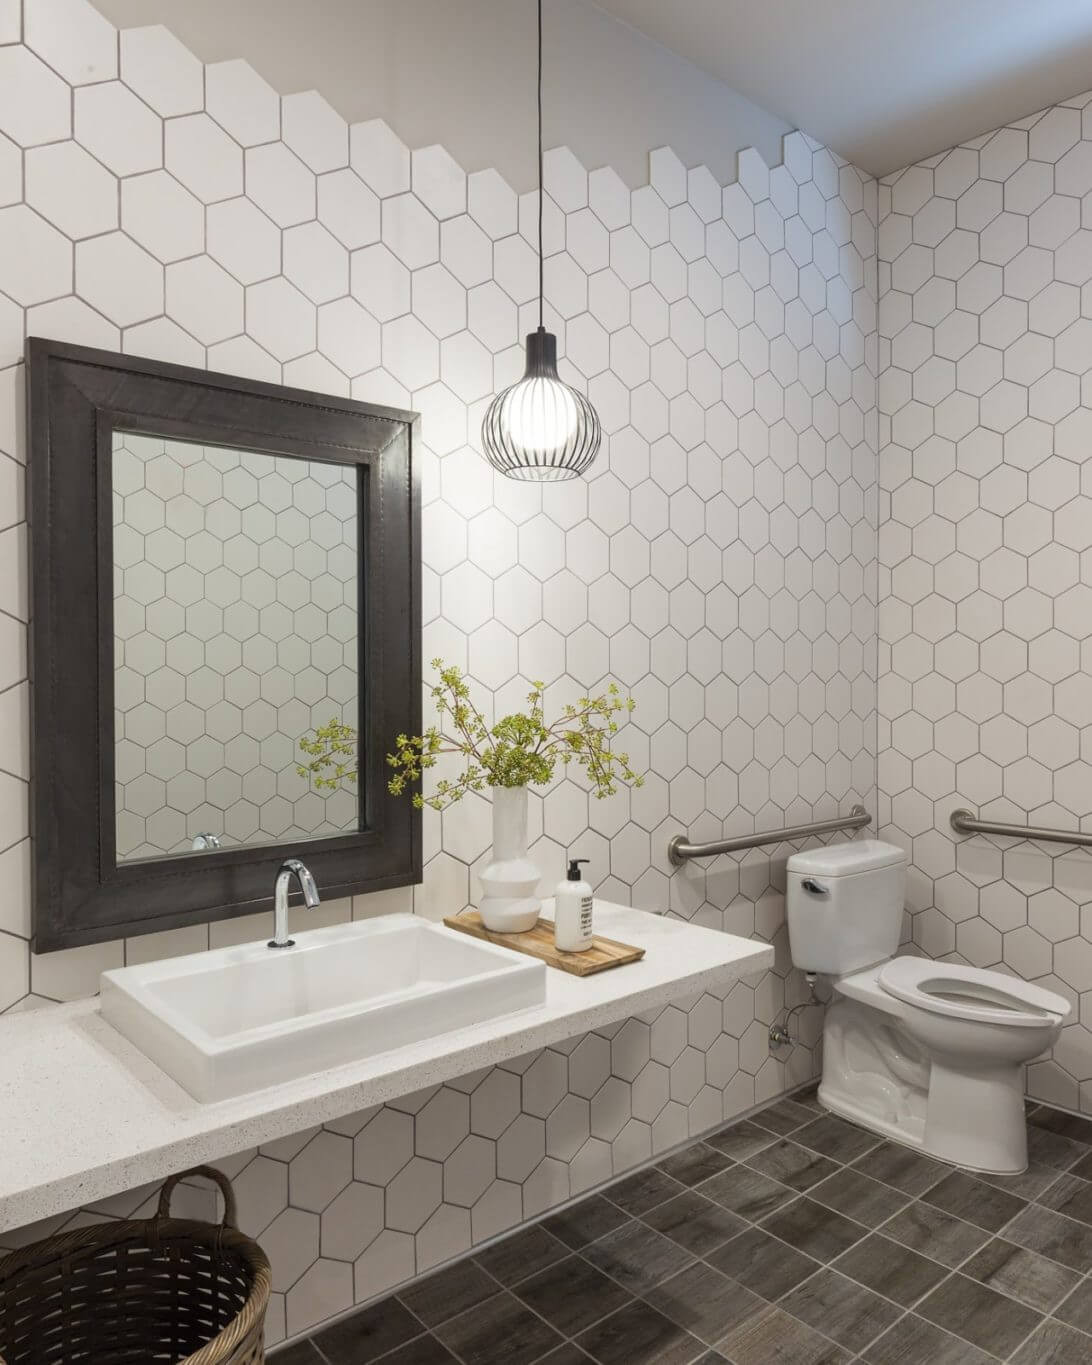 Tiling Bathroom Wall
 Your plete Guide to Bathroom Tile